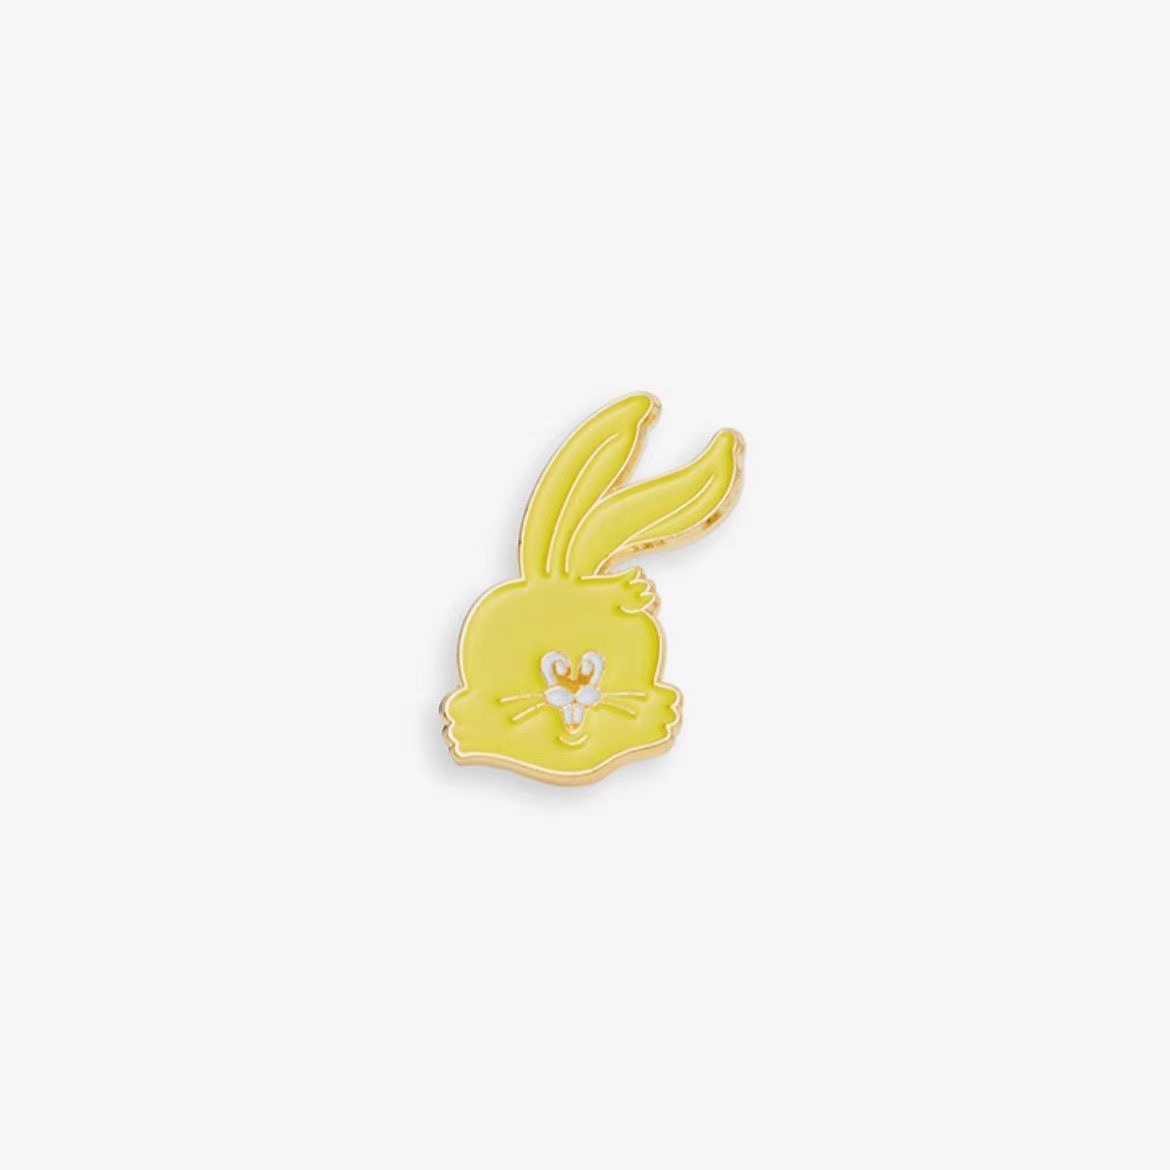 New Newjeans Same Style as the Official Products Cartoon Alloy Cute Rabbit Brooch Logo Badge [Spot]]